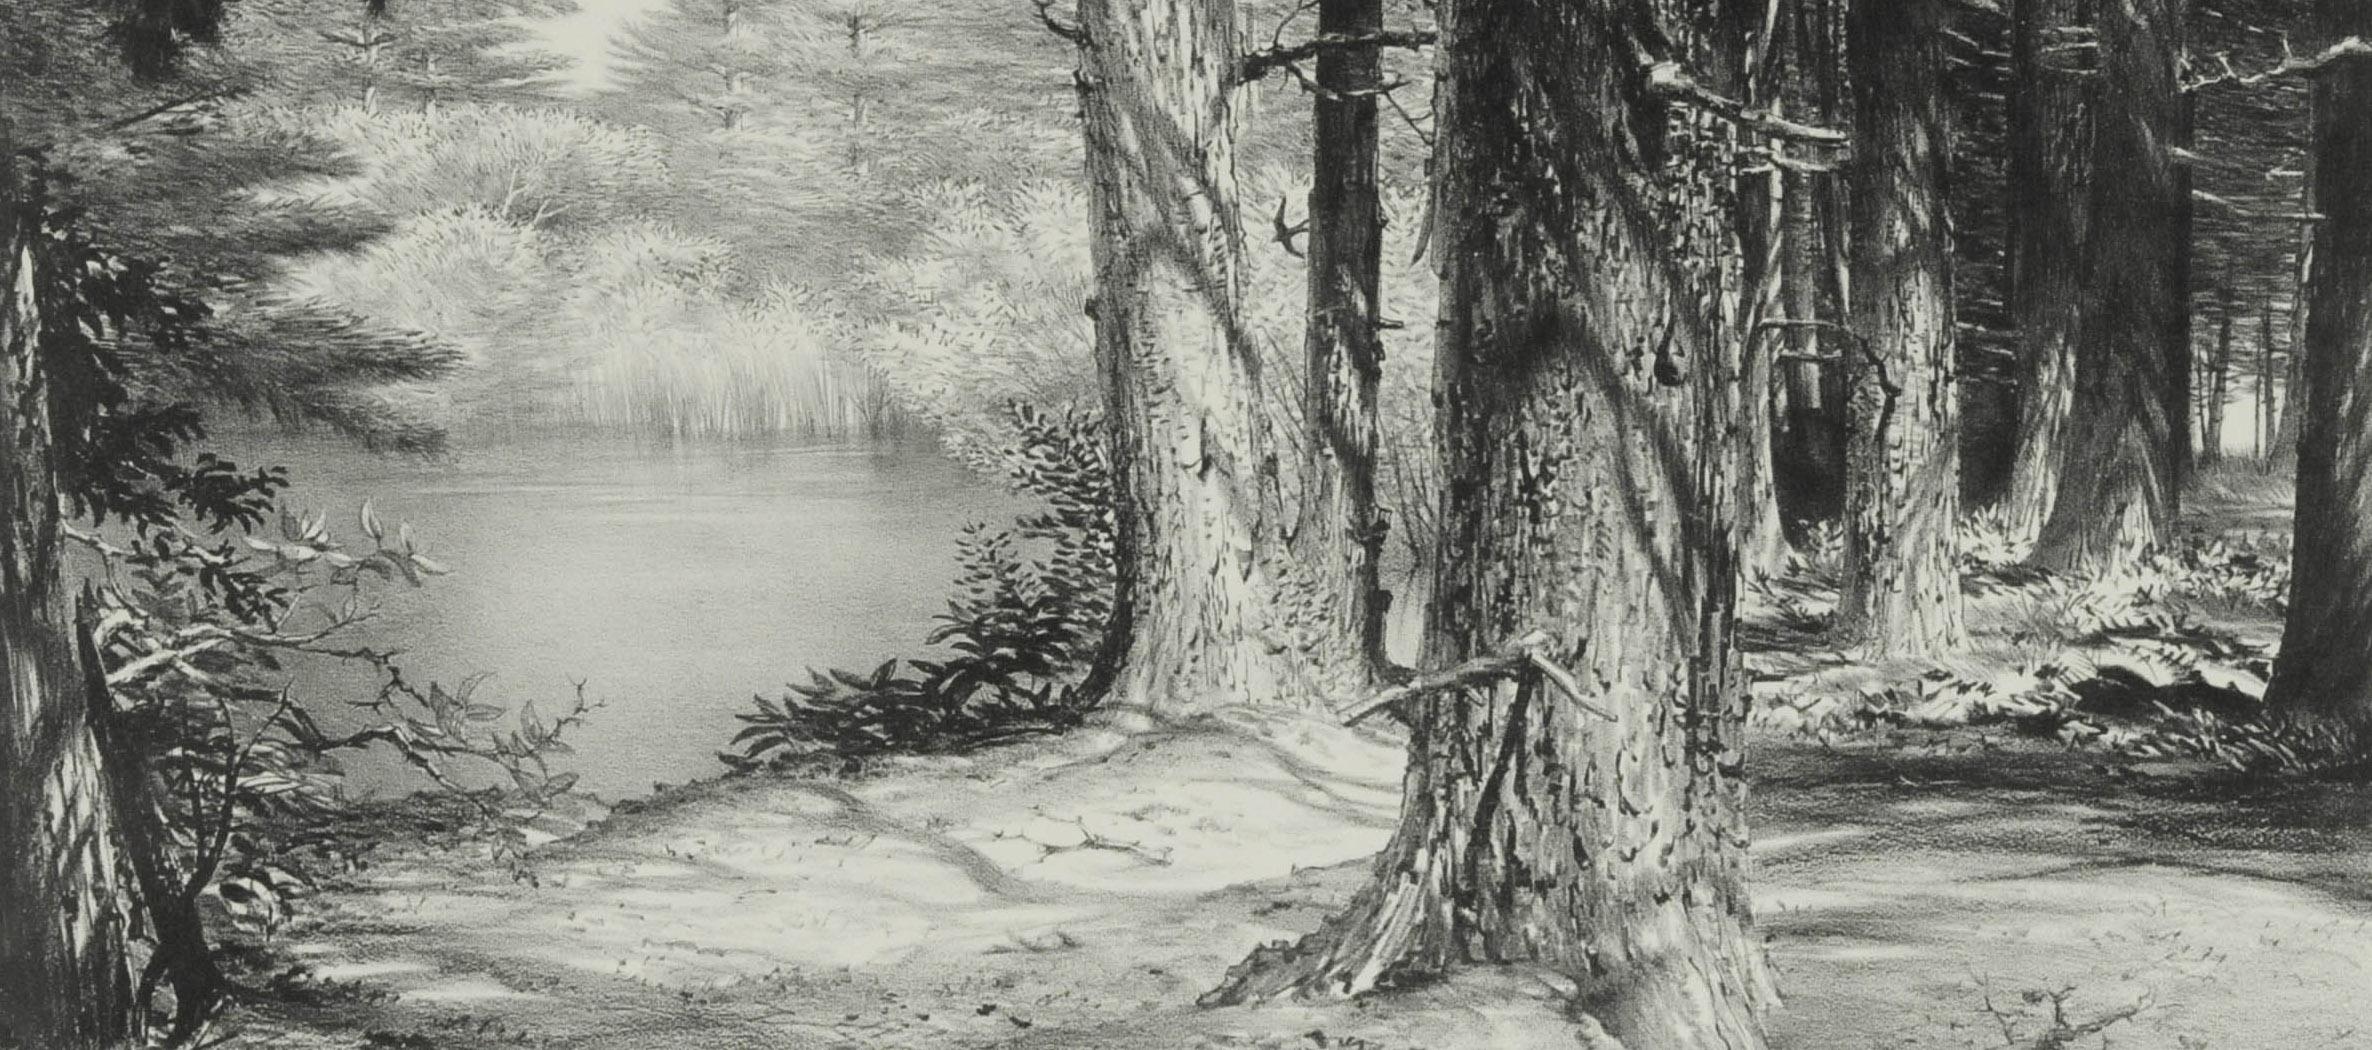 Hidden Pond
Lithograph, 1958
Signed in pencil lower right of image
Annotated: Ed/40 in pencil by the artist lower left
Edition: 40
Provenance:
Baldwin-Wallace College, Berea, OH (accession number 62.18)
References:
R. and J. Stuckey, The Lithographs